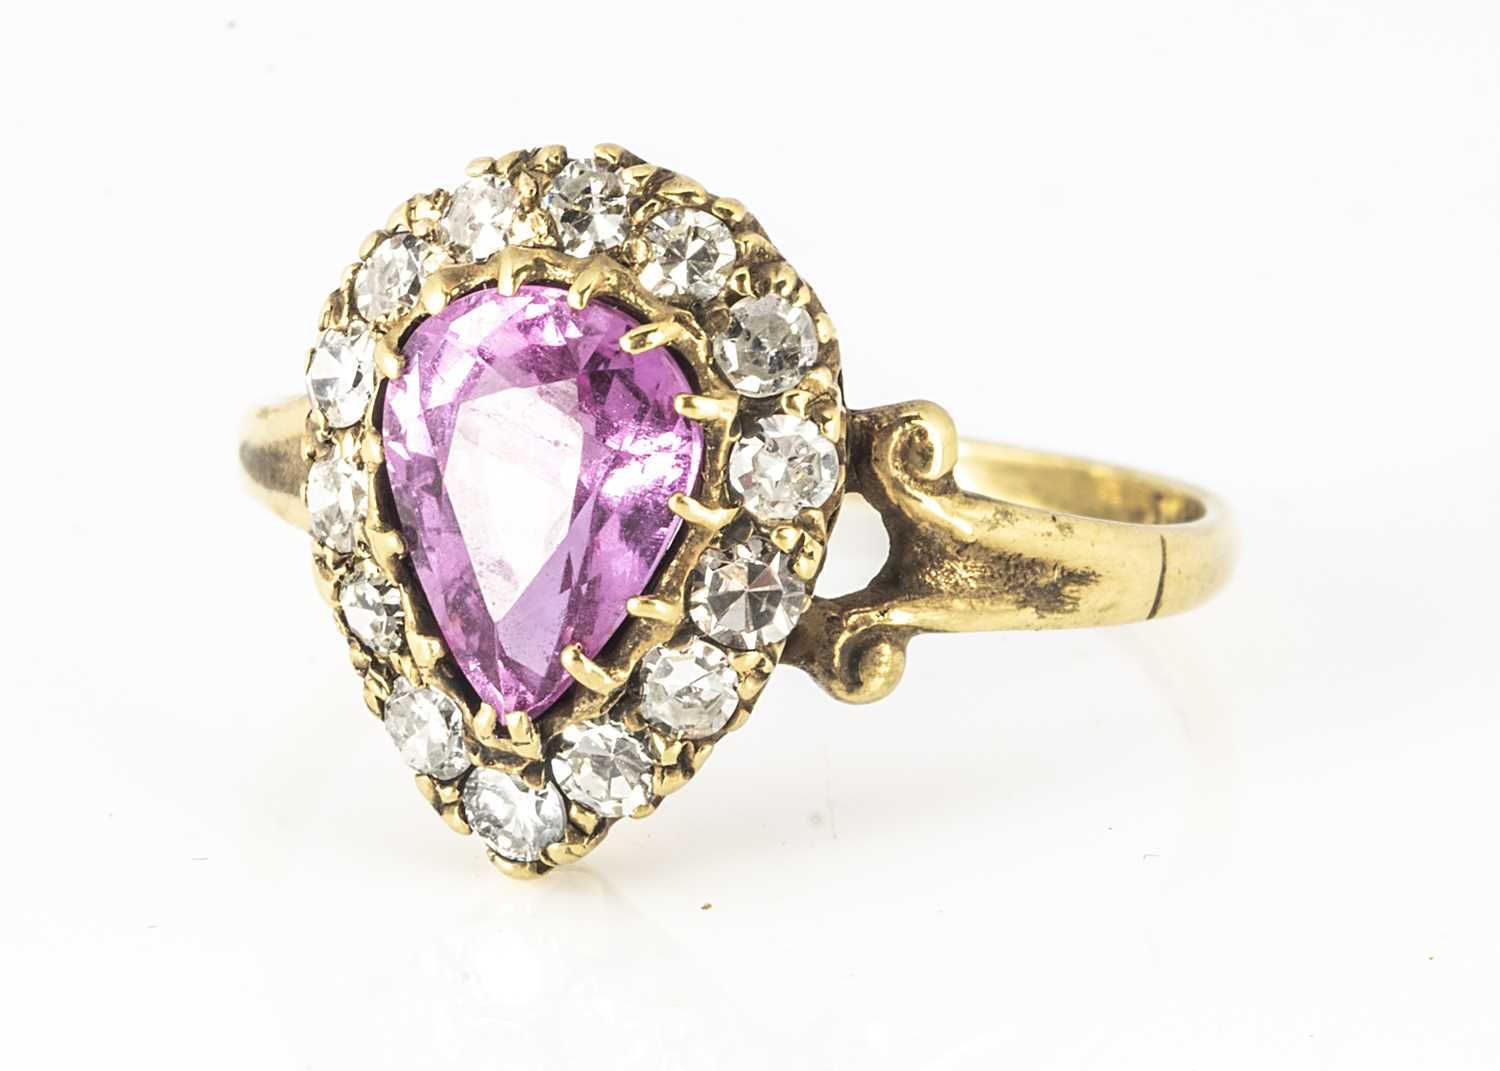 Lot 116 - An 18ct yellow gold pink pear cut sapphire and diamond cluster ring